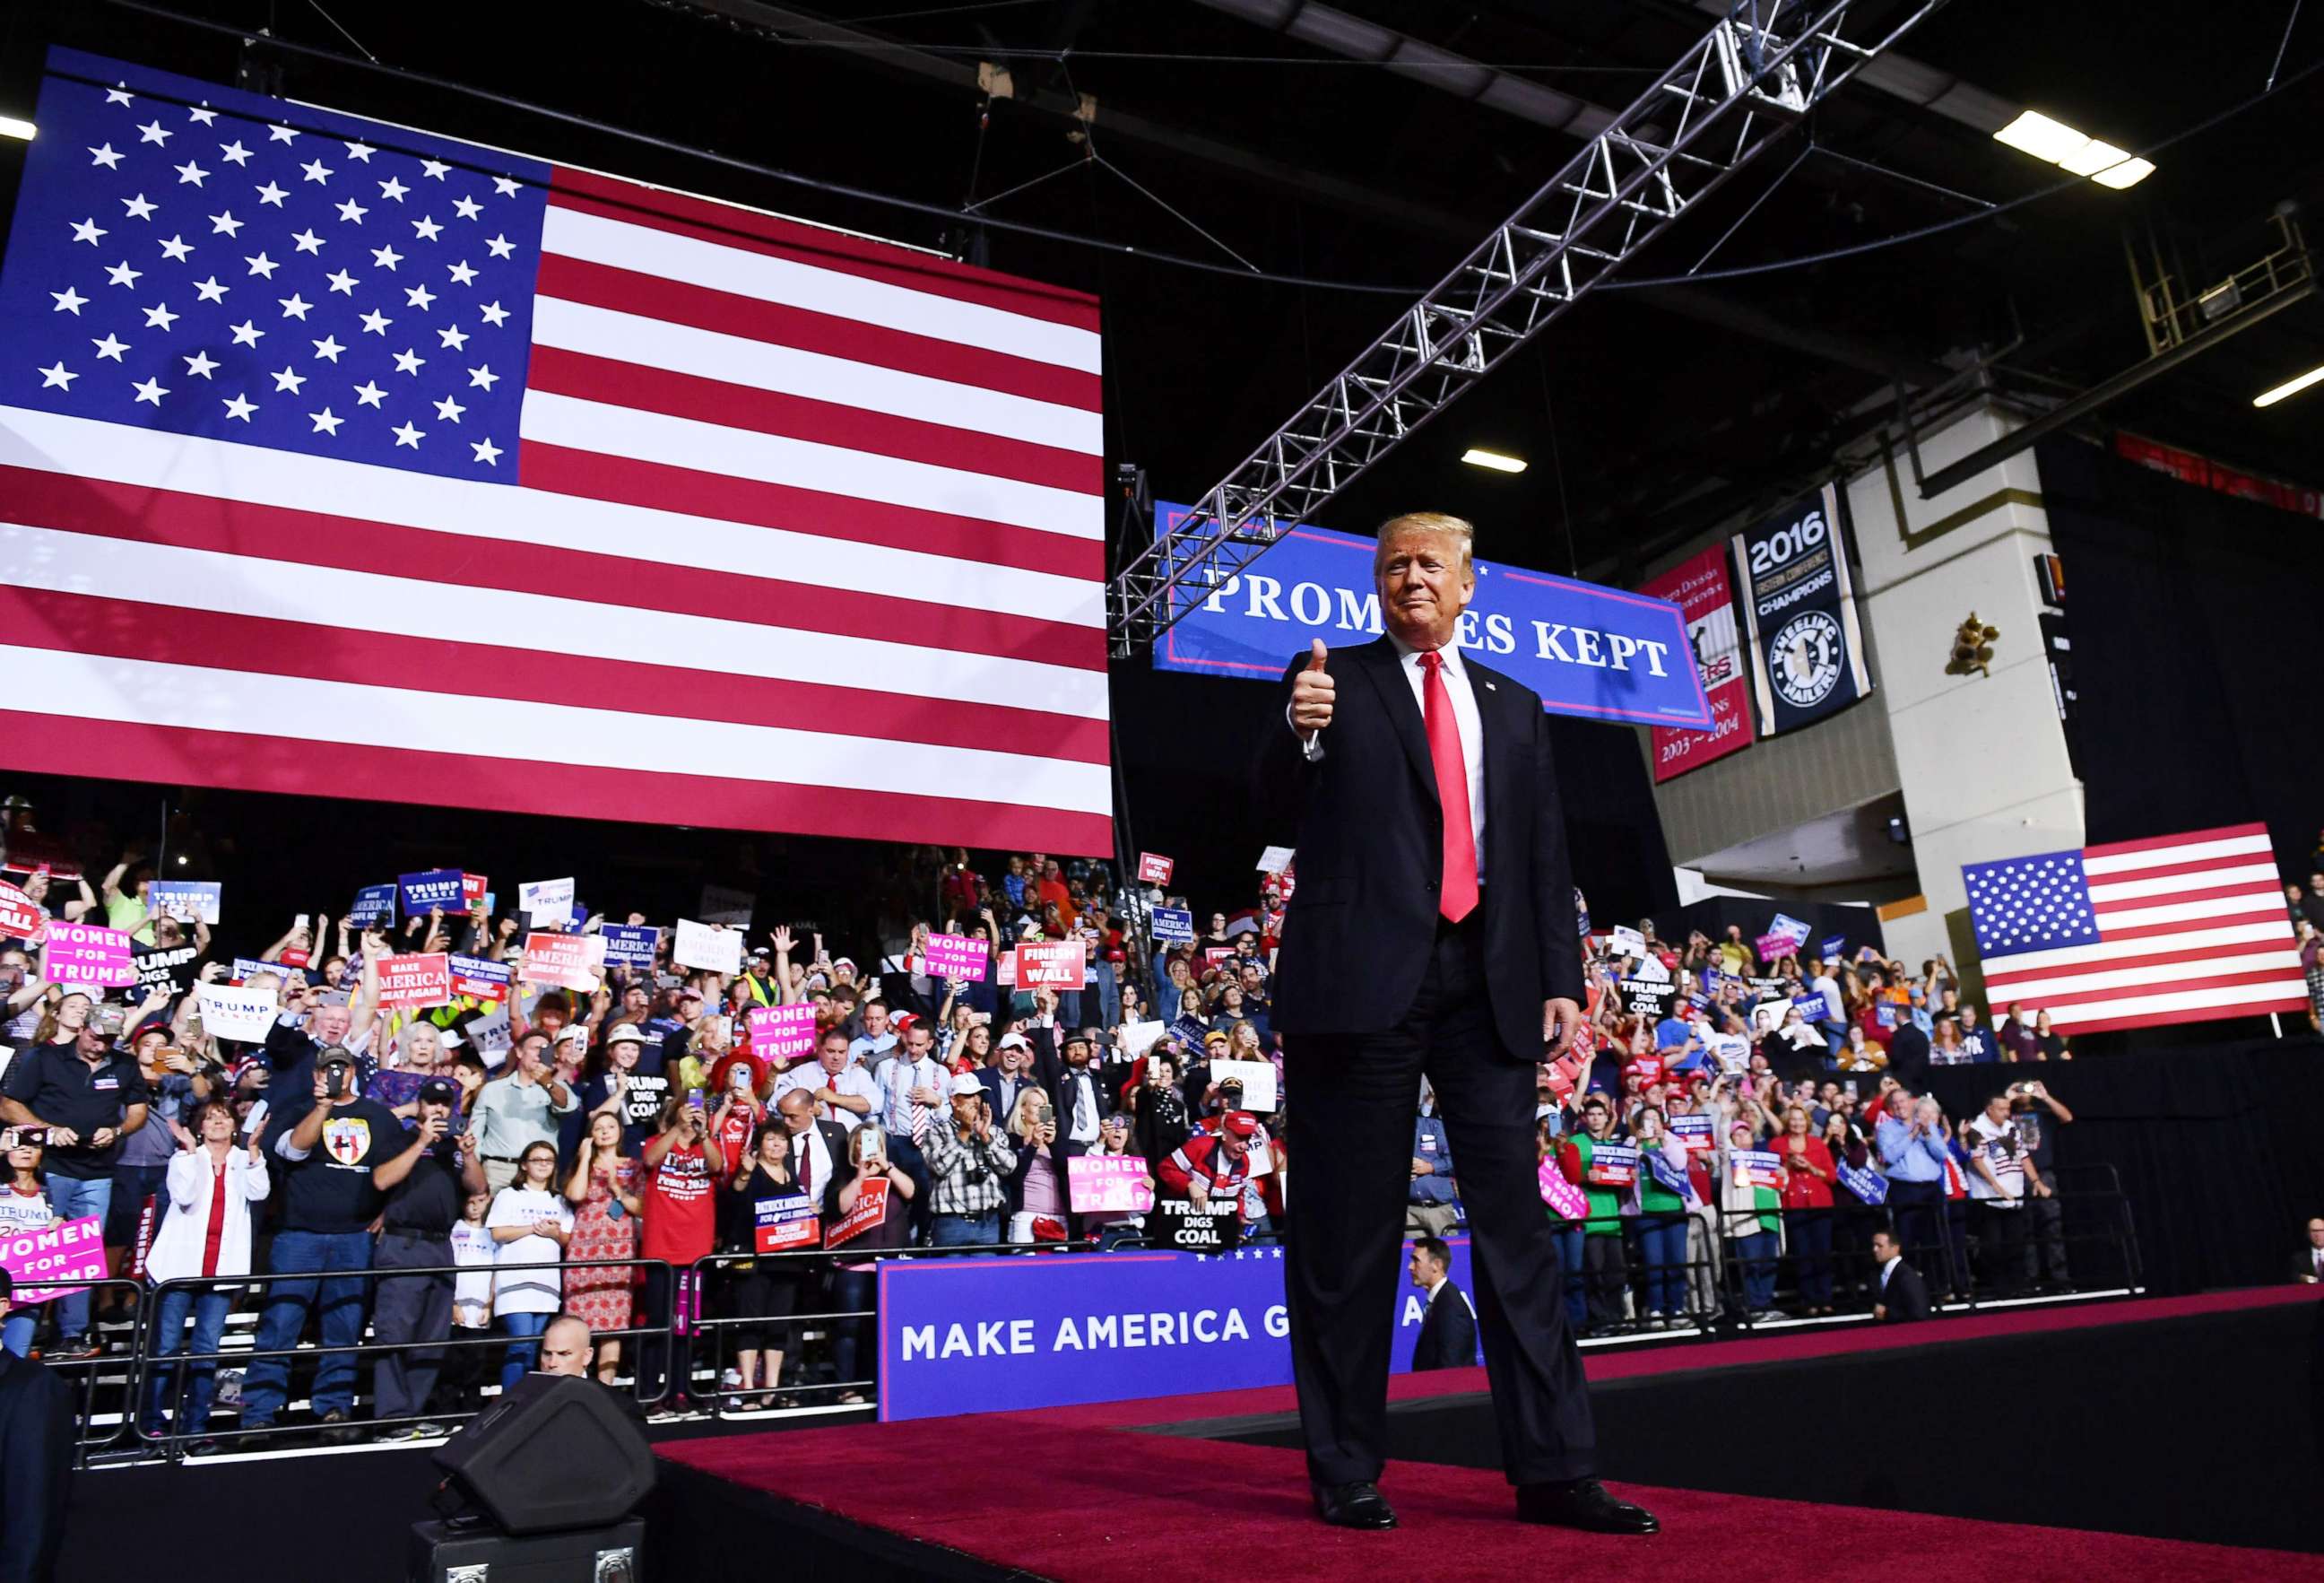 PHOTO: President Donald Trump gives a thumbs up during a rally at WesBanco Arena in Wheeling, West Virginia on September 29, 2018.